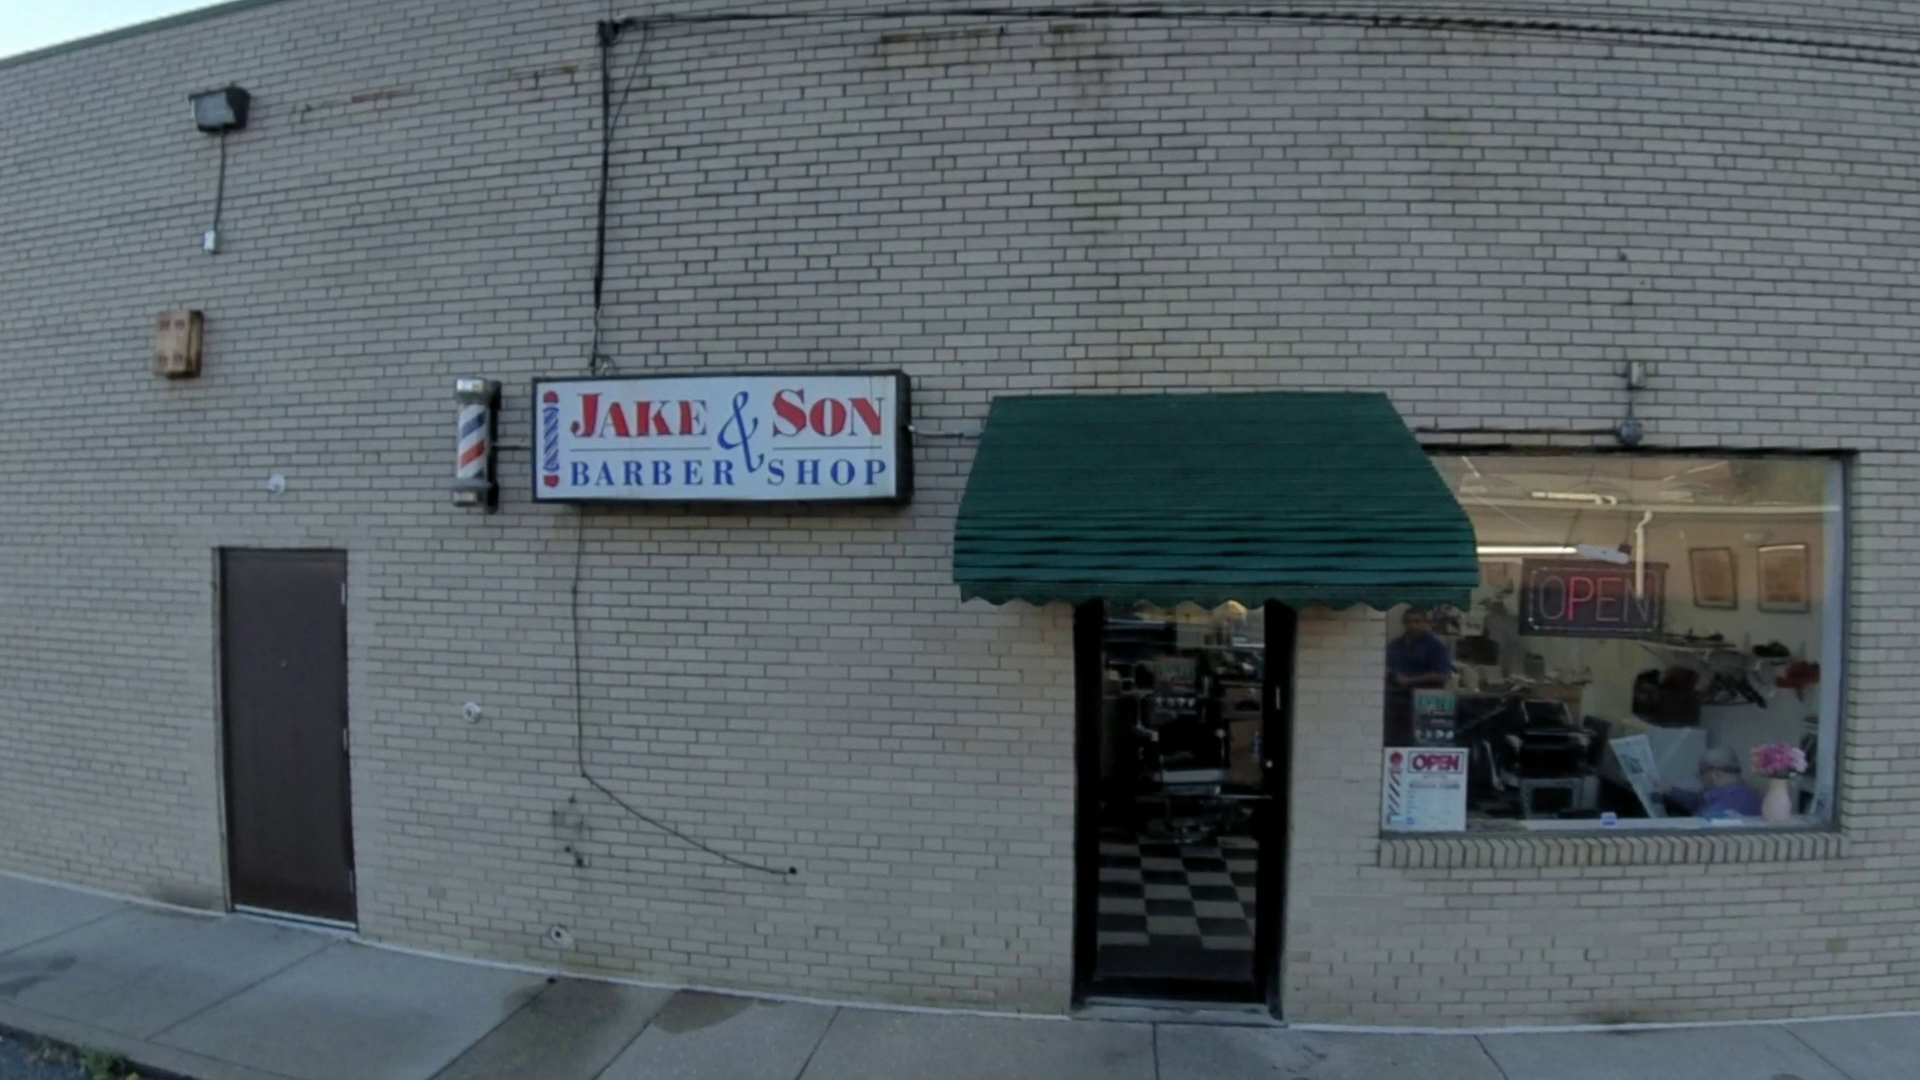 Jake and son's barber shop